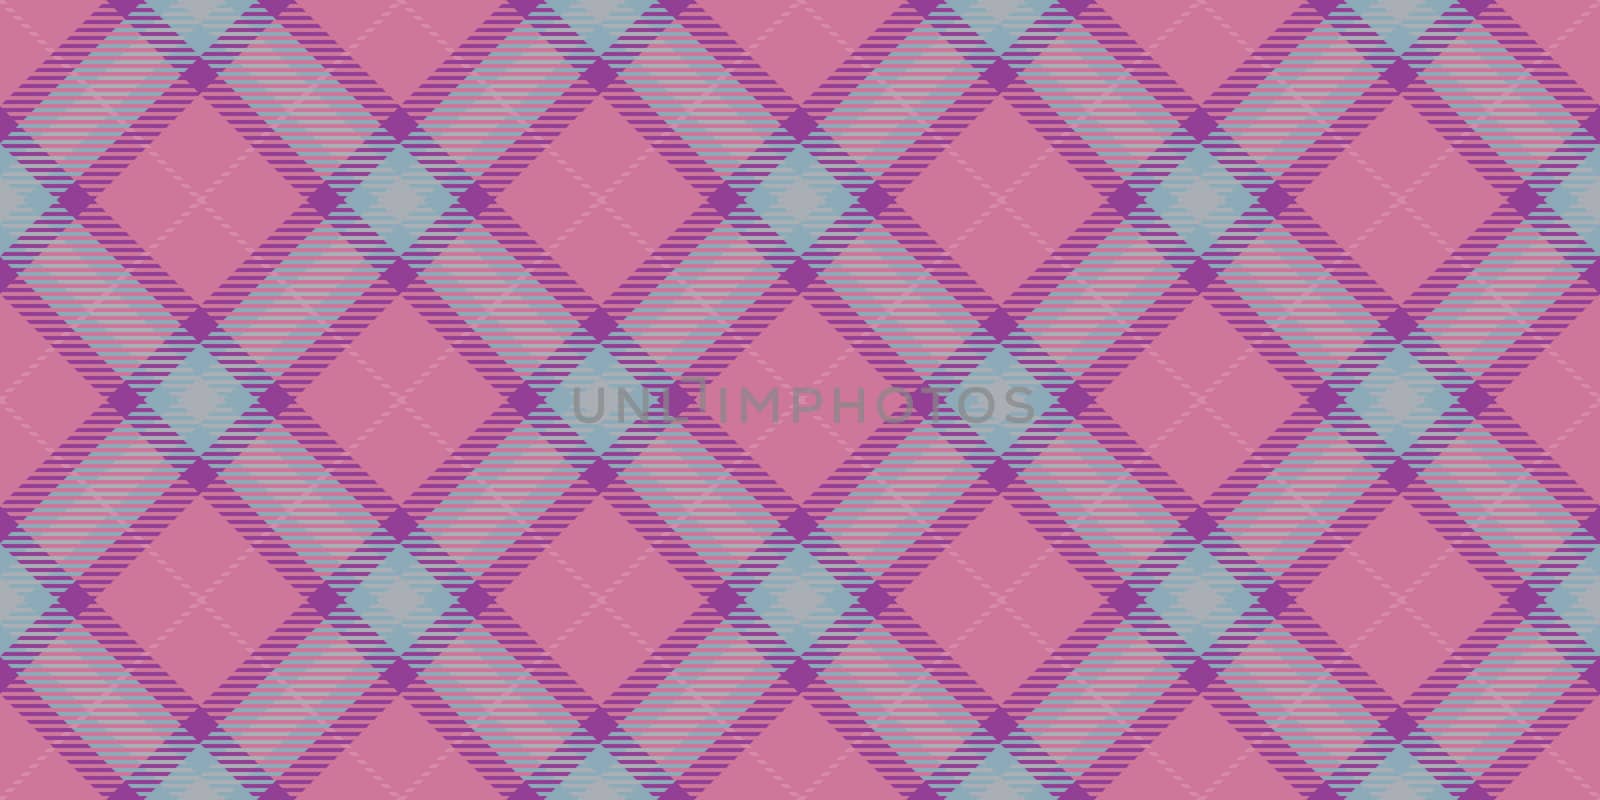 Pink Blue Seamless Checkered Rhombuses Pattern. Plaid Rug Background. Tartan Texture. by sanches812